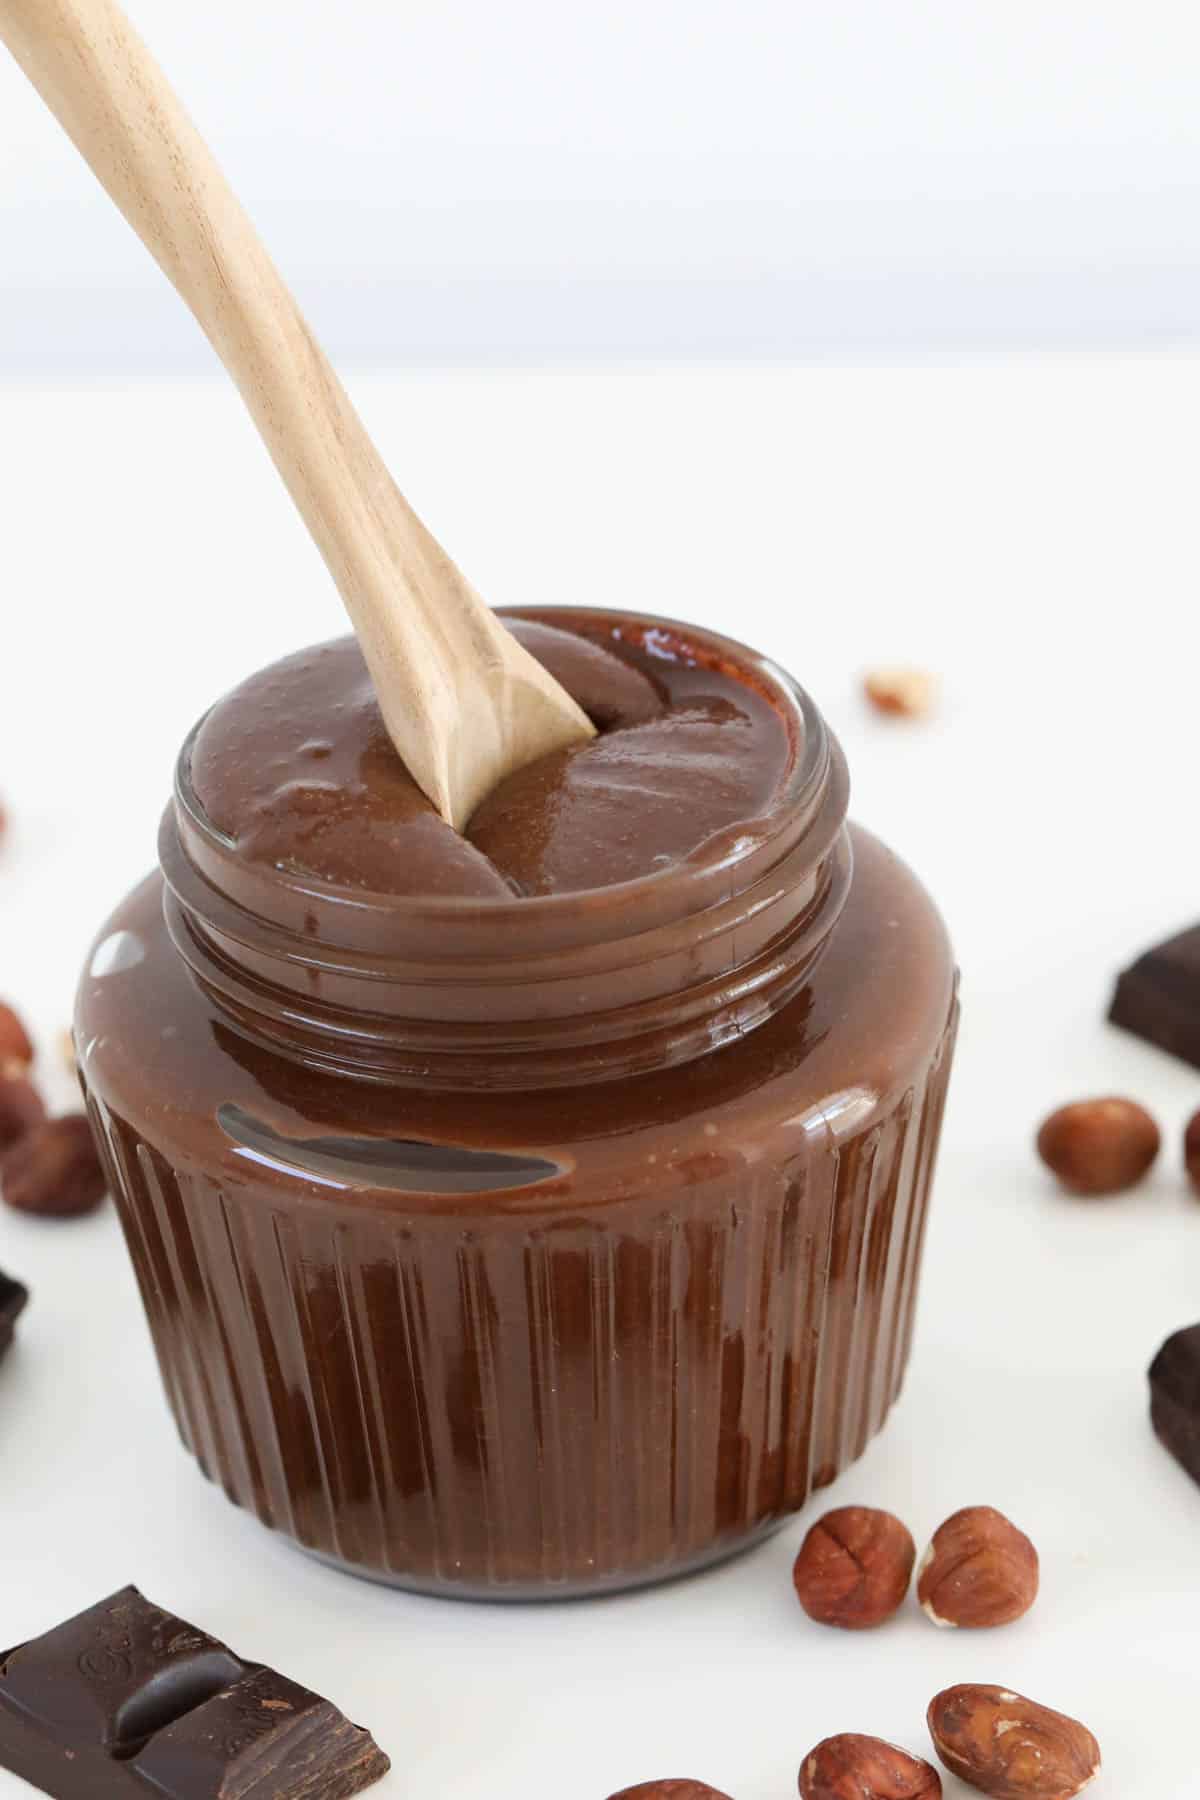 A spoon in a glass jar filled with homemade chocolate hazelnut spread.